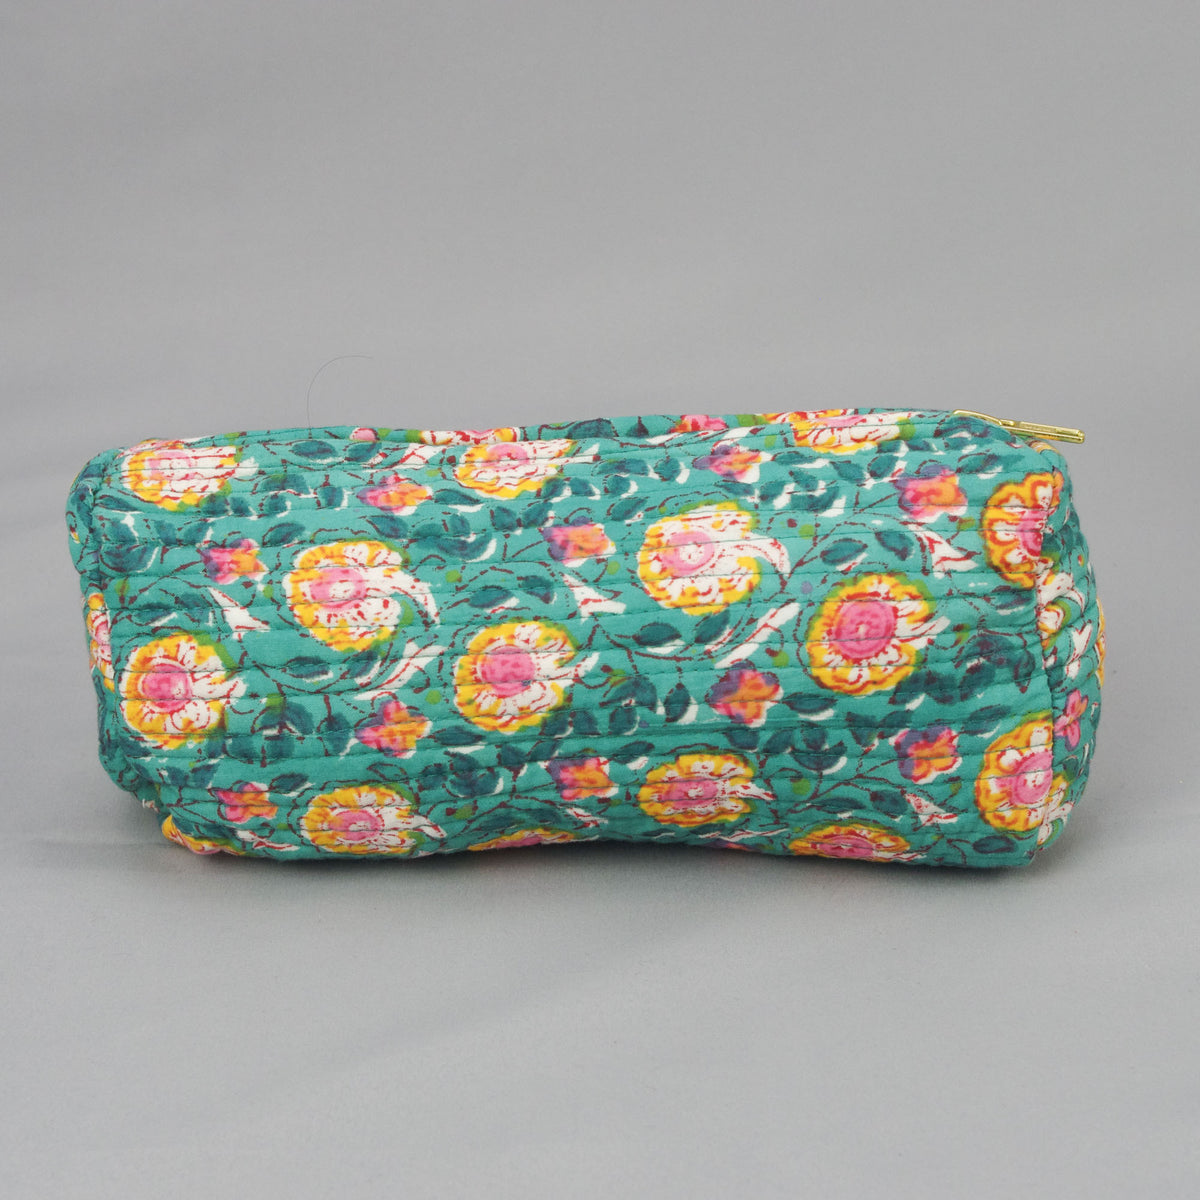 Block Print Makeup Pouch or Pencil Case- Teal Green Floral